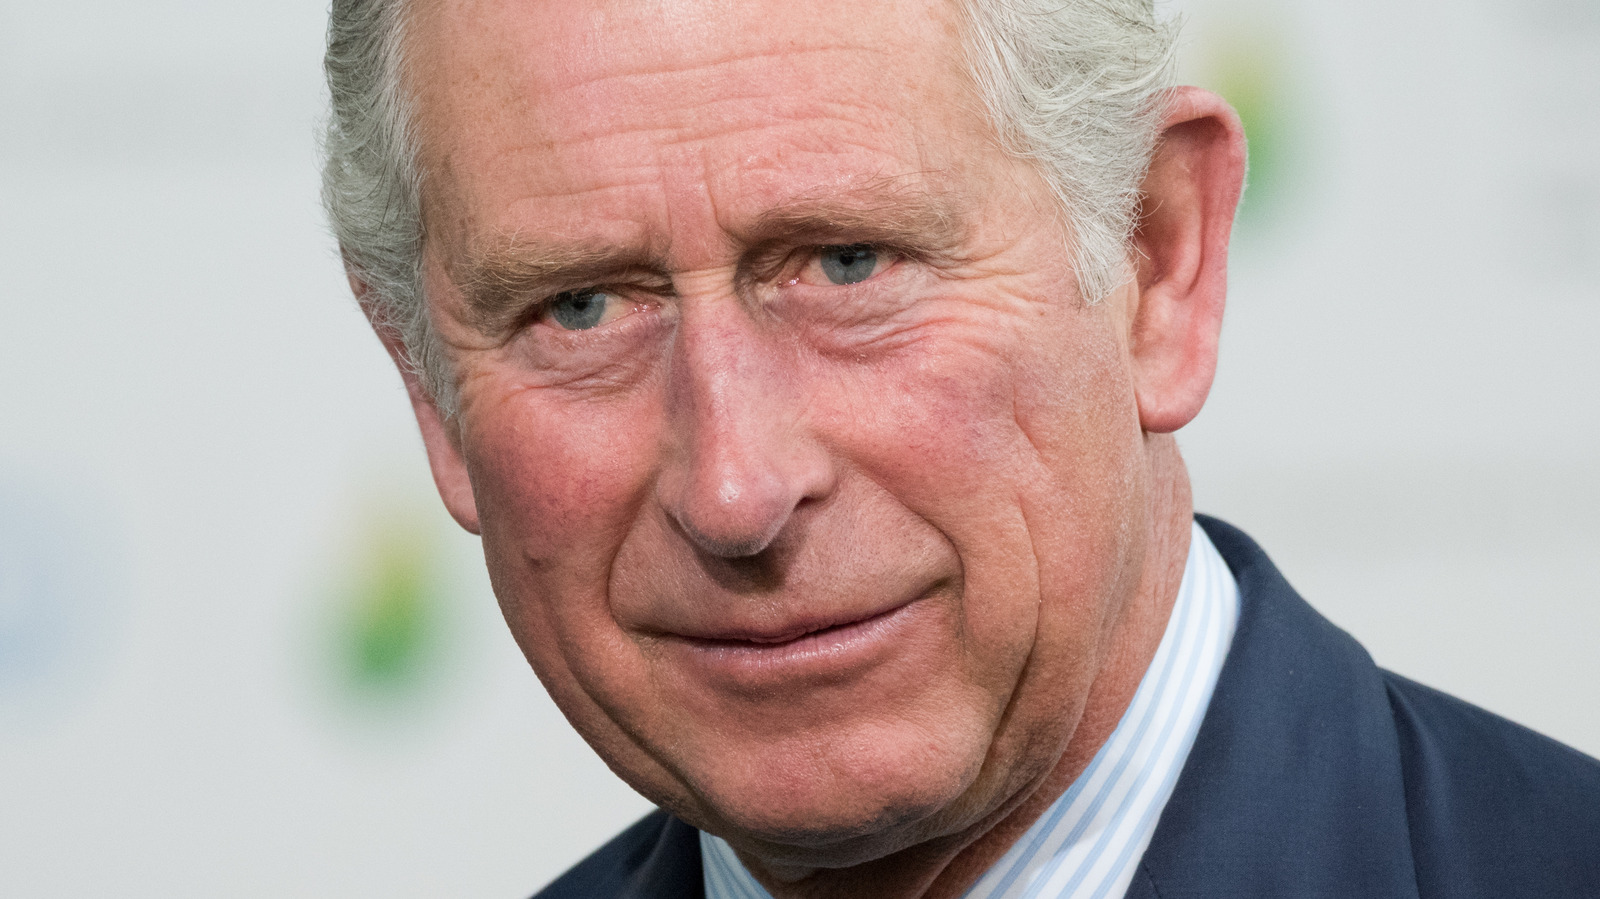 What is Prince Charles’ first hurdle before becoming the king?